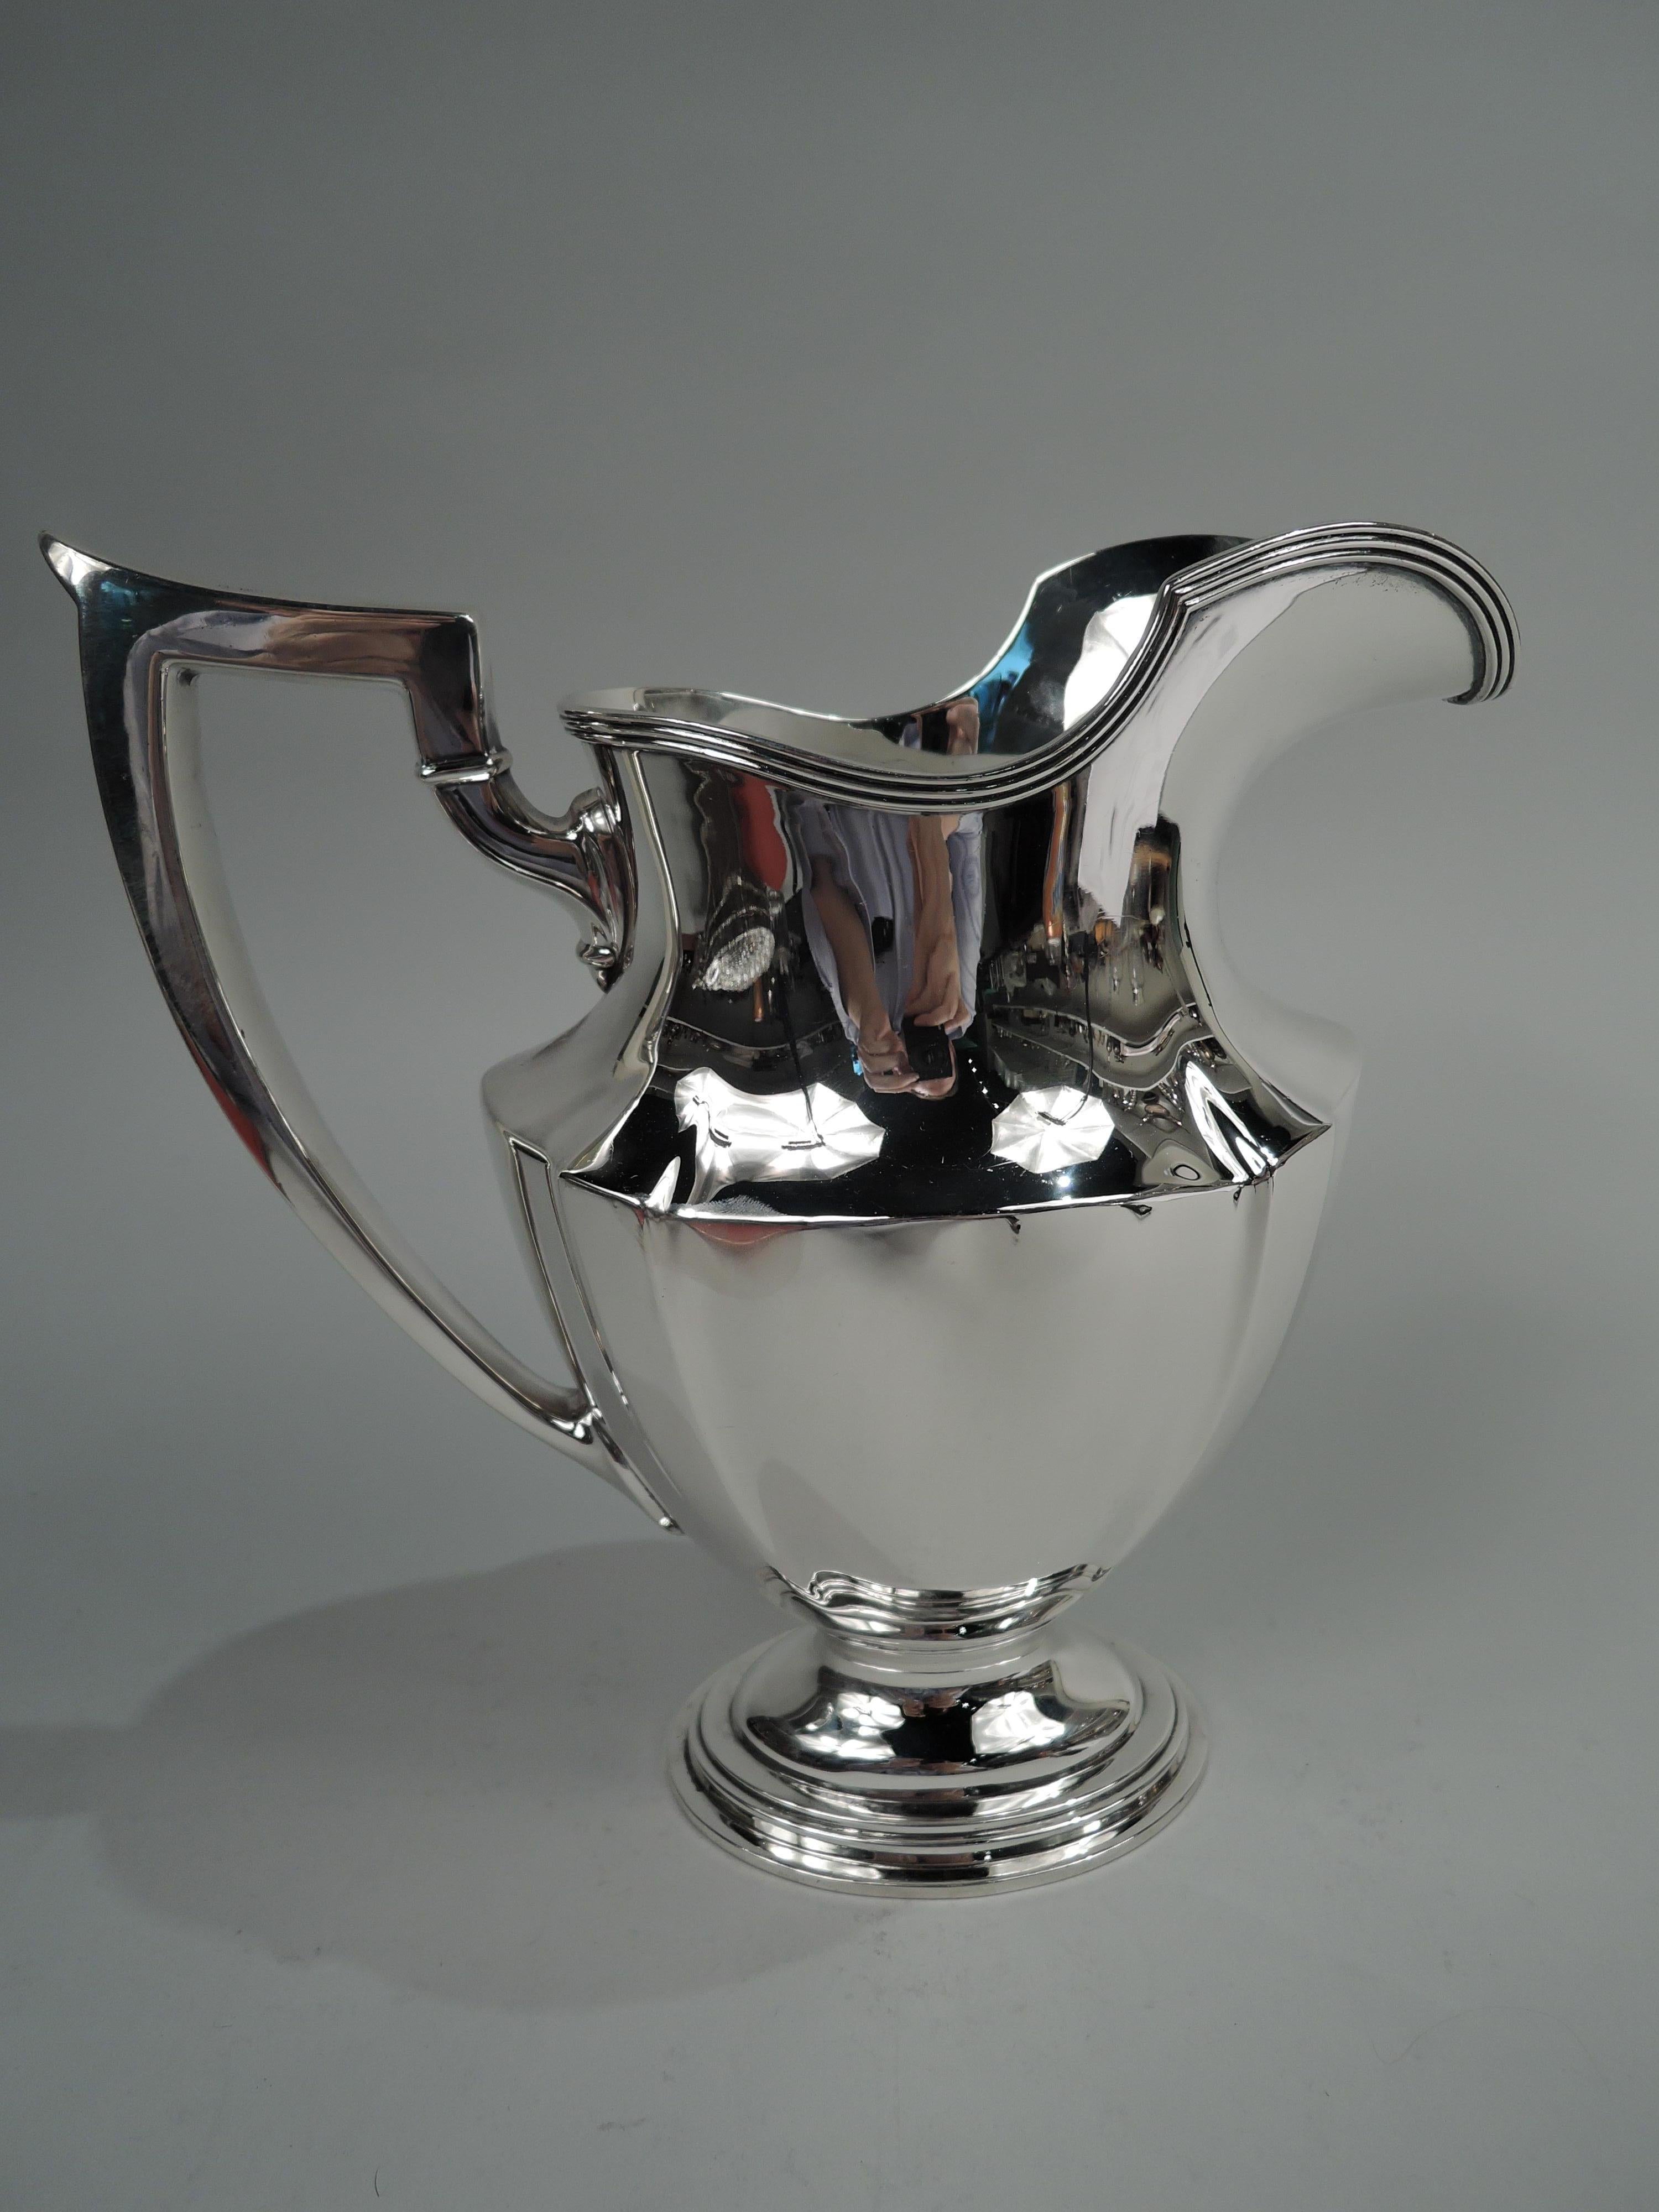 Plymouth sterling silver water pitcher. Made by Gorham in Providence in 1909. Tapering and paneled ovoid body, reeded helmet mouth, capped scroll bracket handle, and stepped oval foot. A fine piece in the classic pattern. Fully marked including